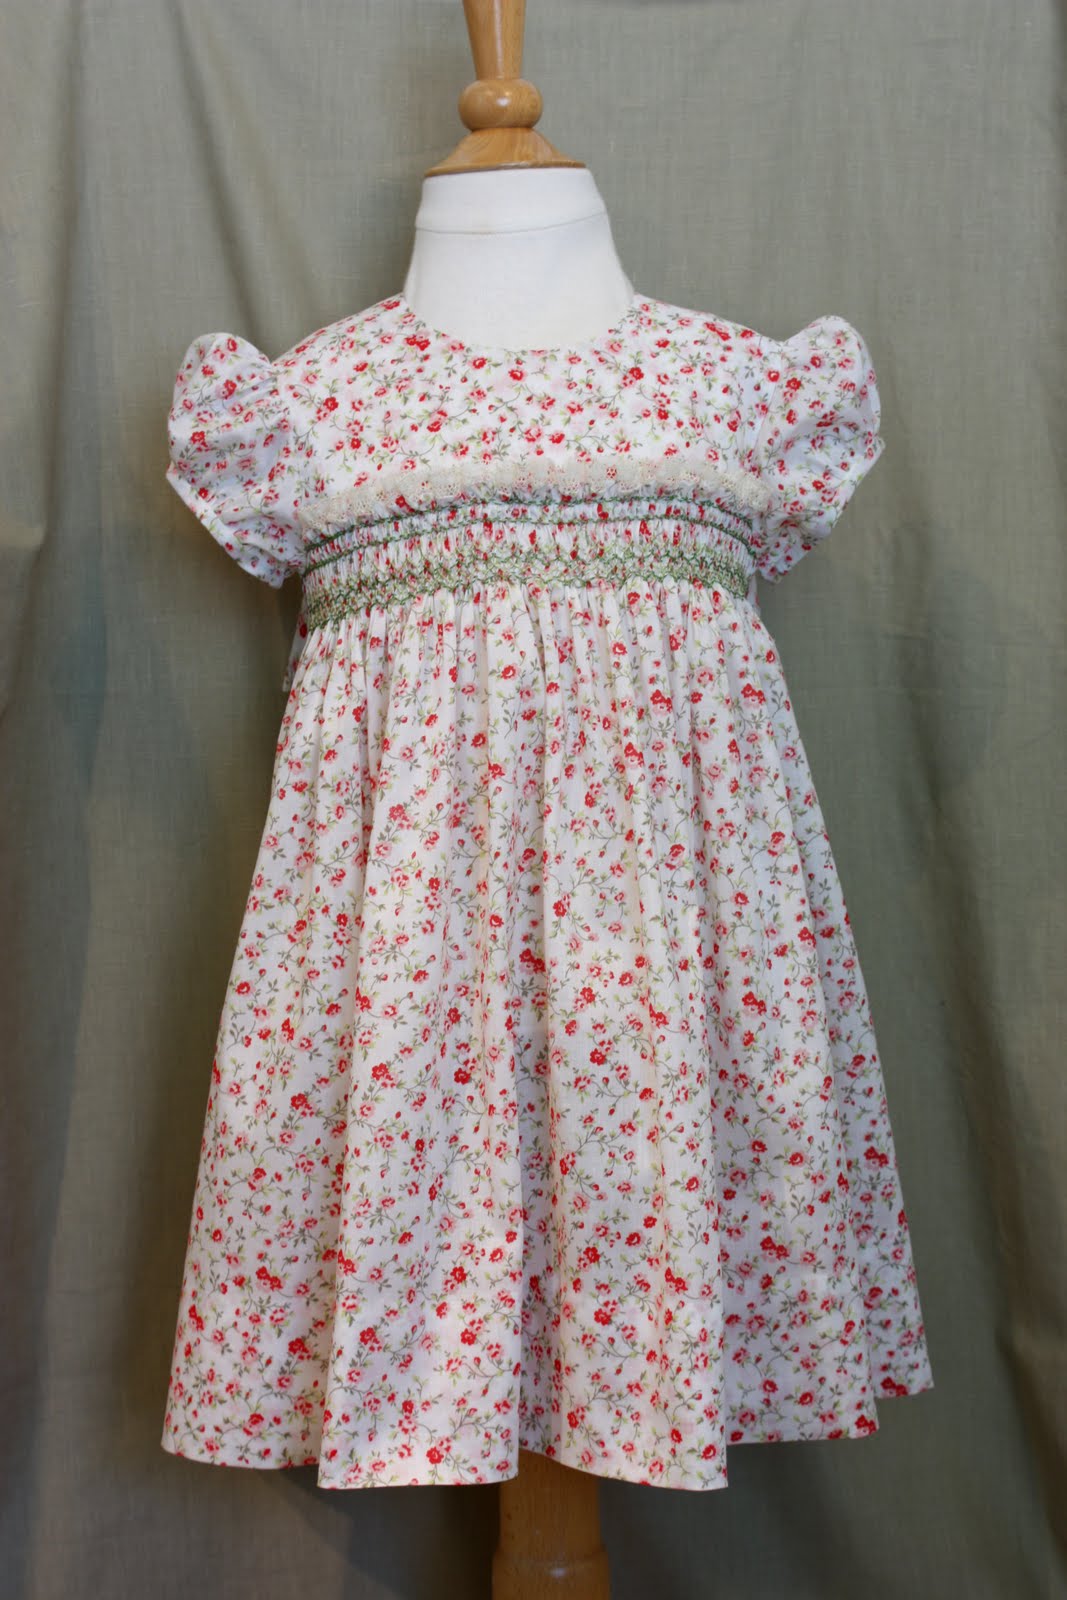 Creations By Michie` Blog: Vintage Baby Dress